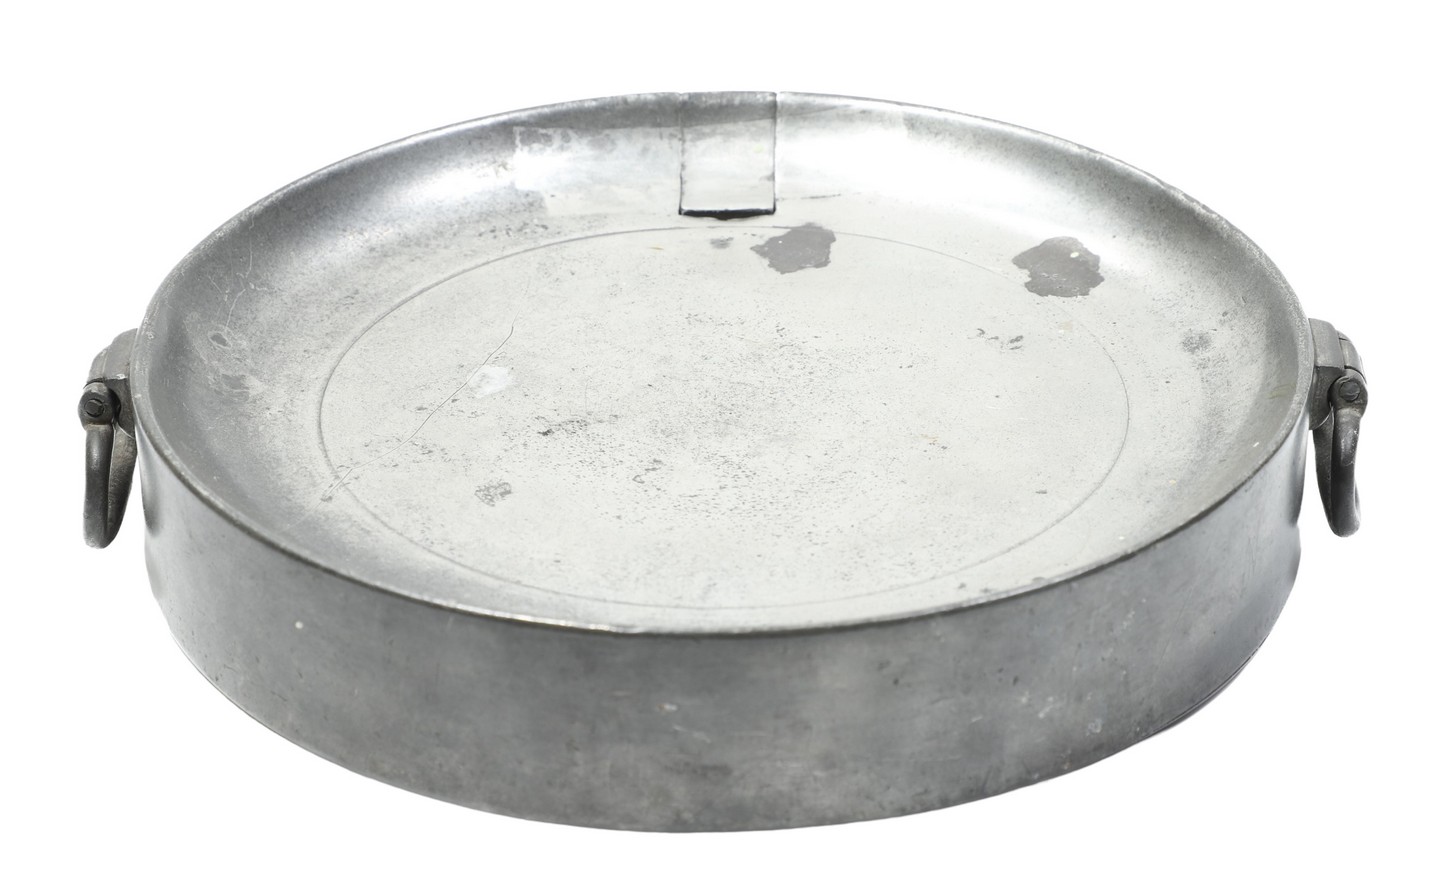 Pewter Warming Dish by S Cocks